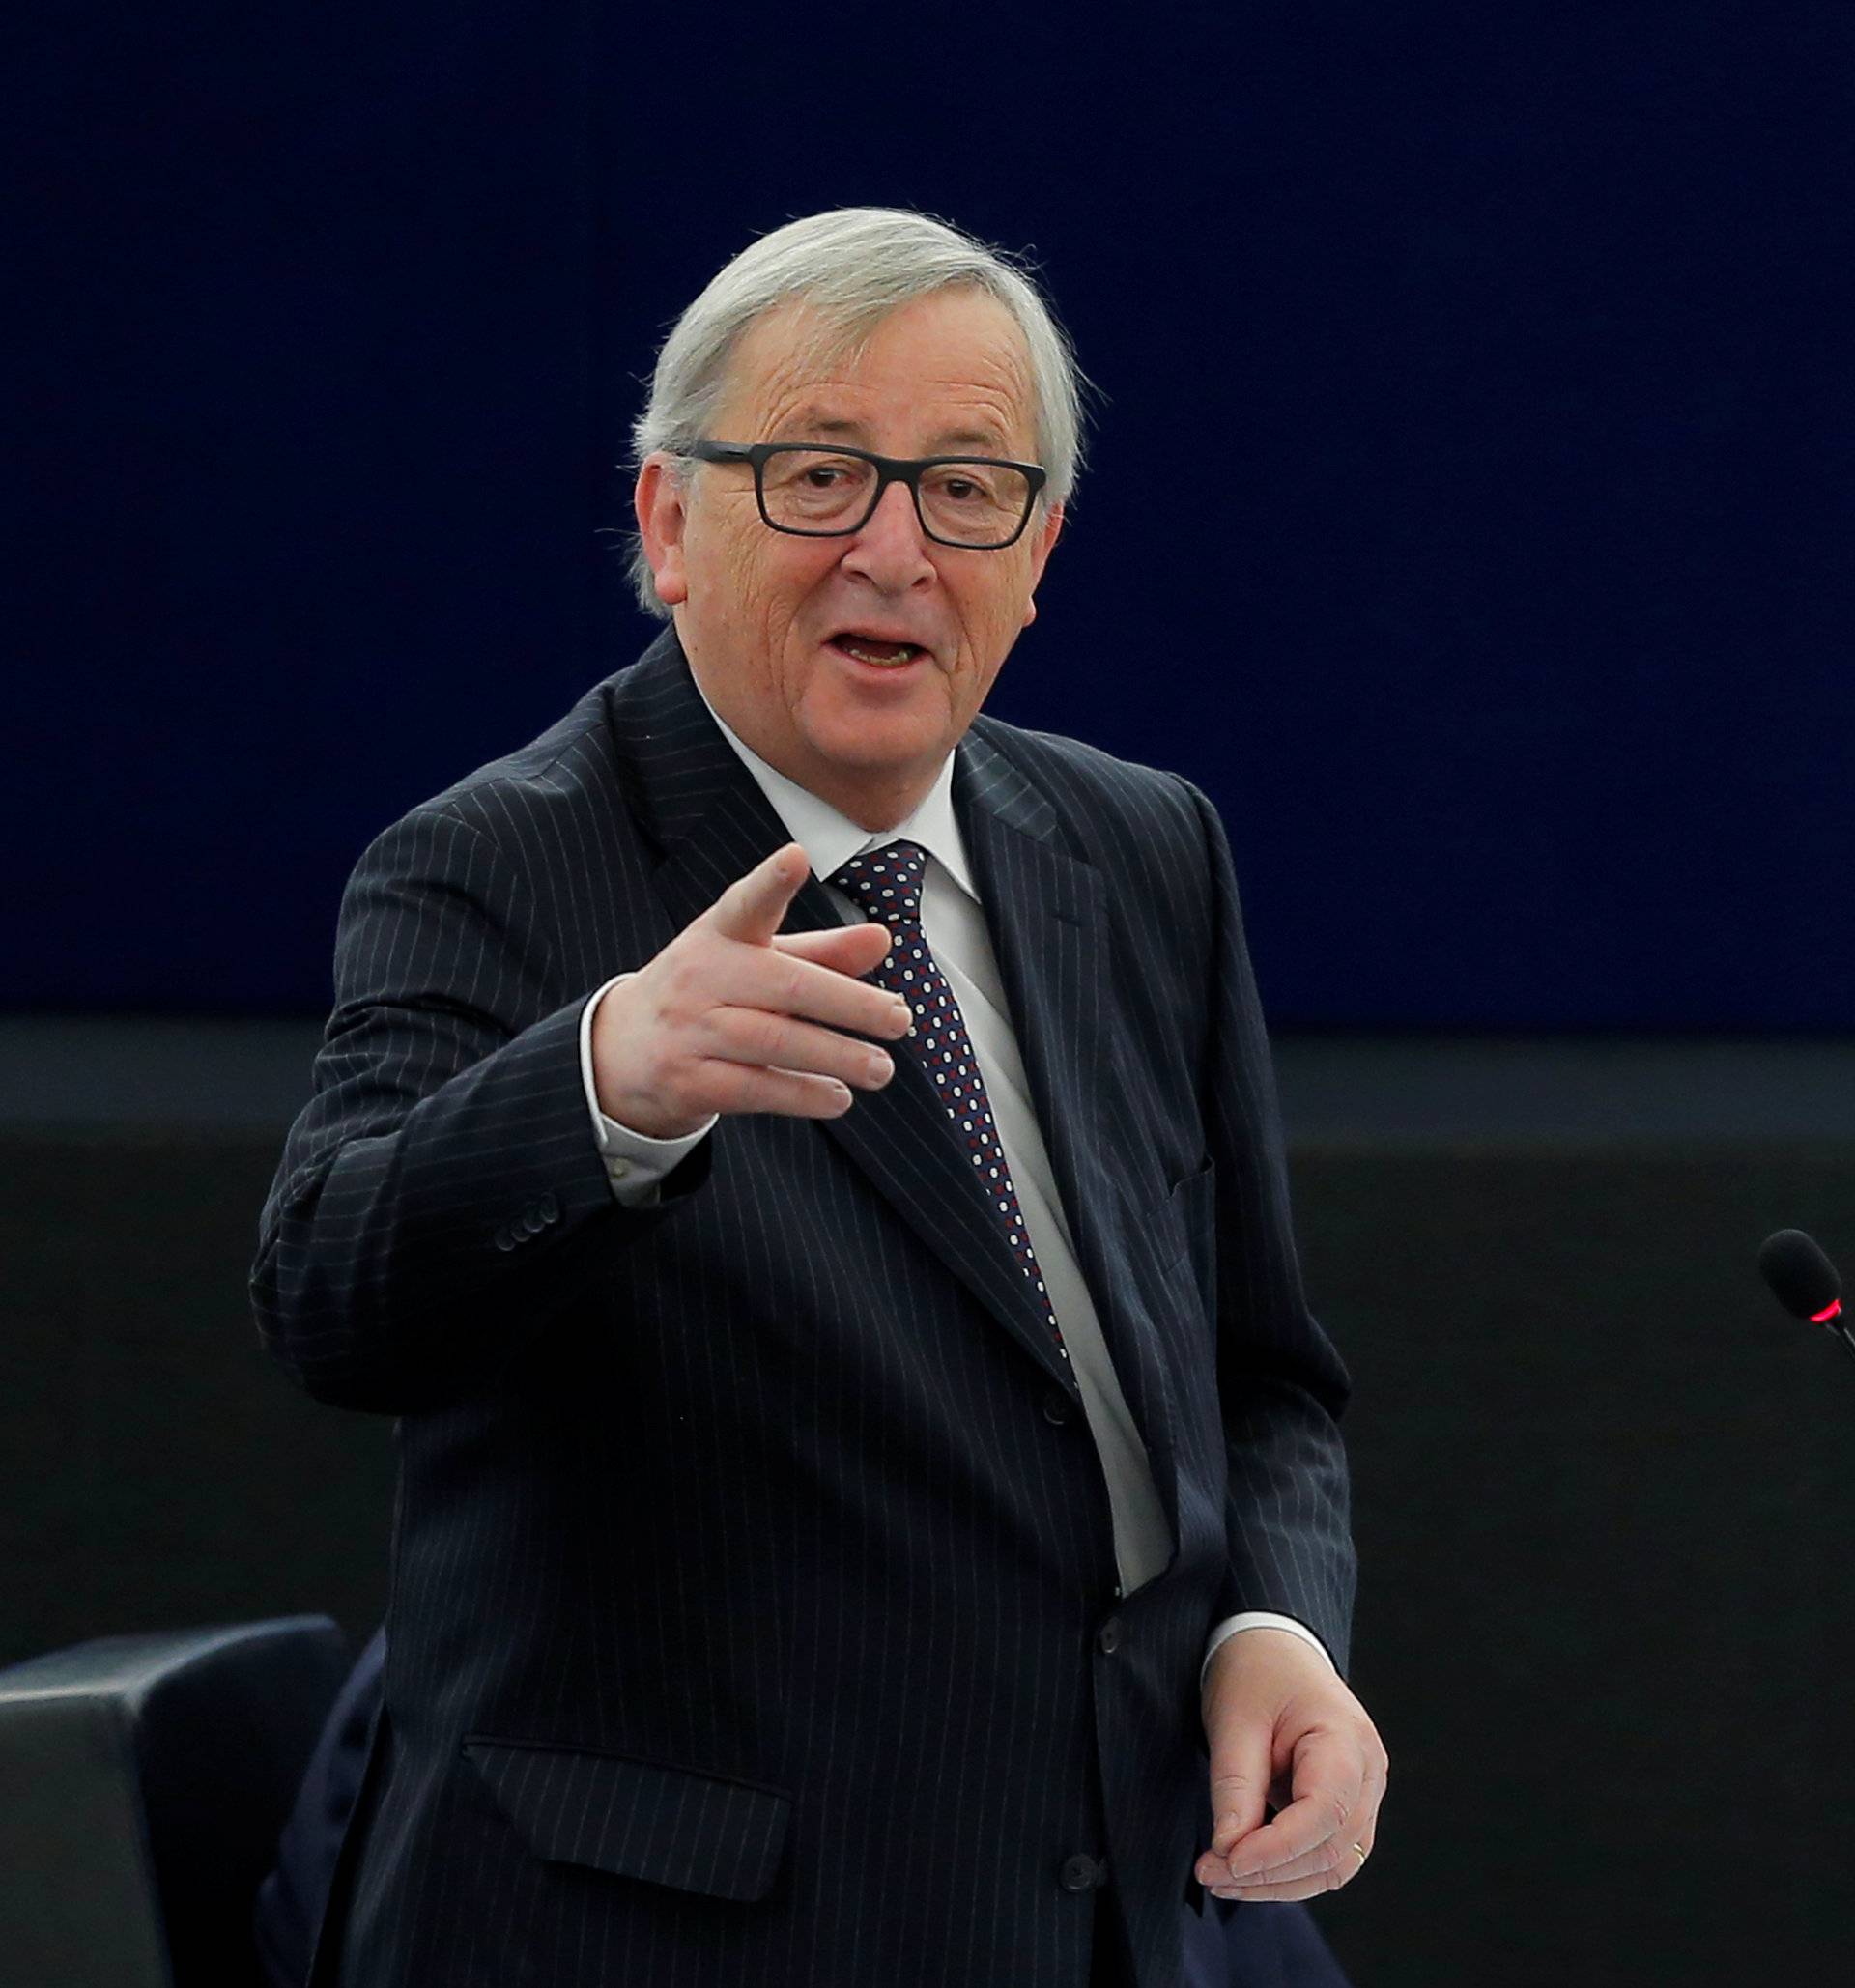 European Commission President Juncker delivers a speech during a debate on the Future of Europe at the European Parliament in Strasbourg